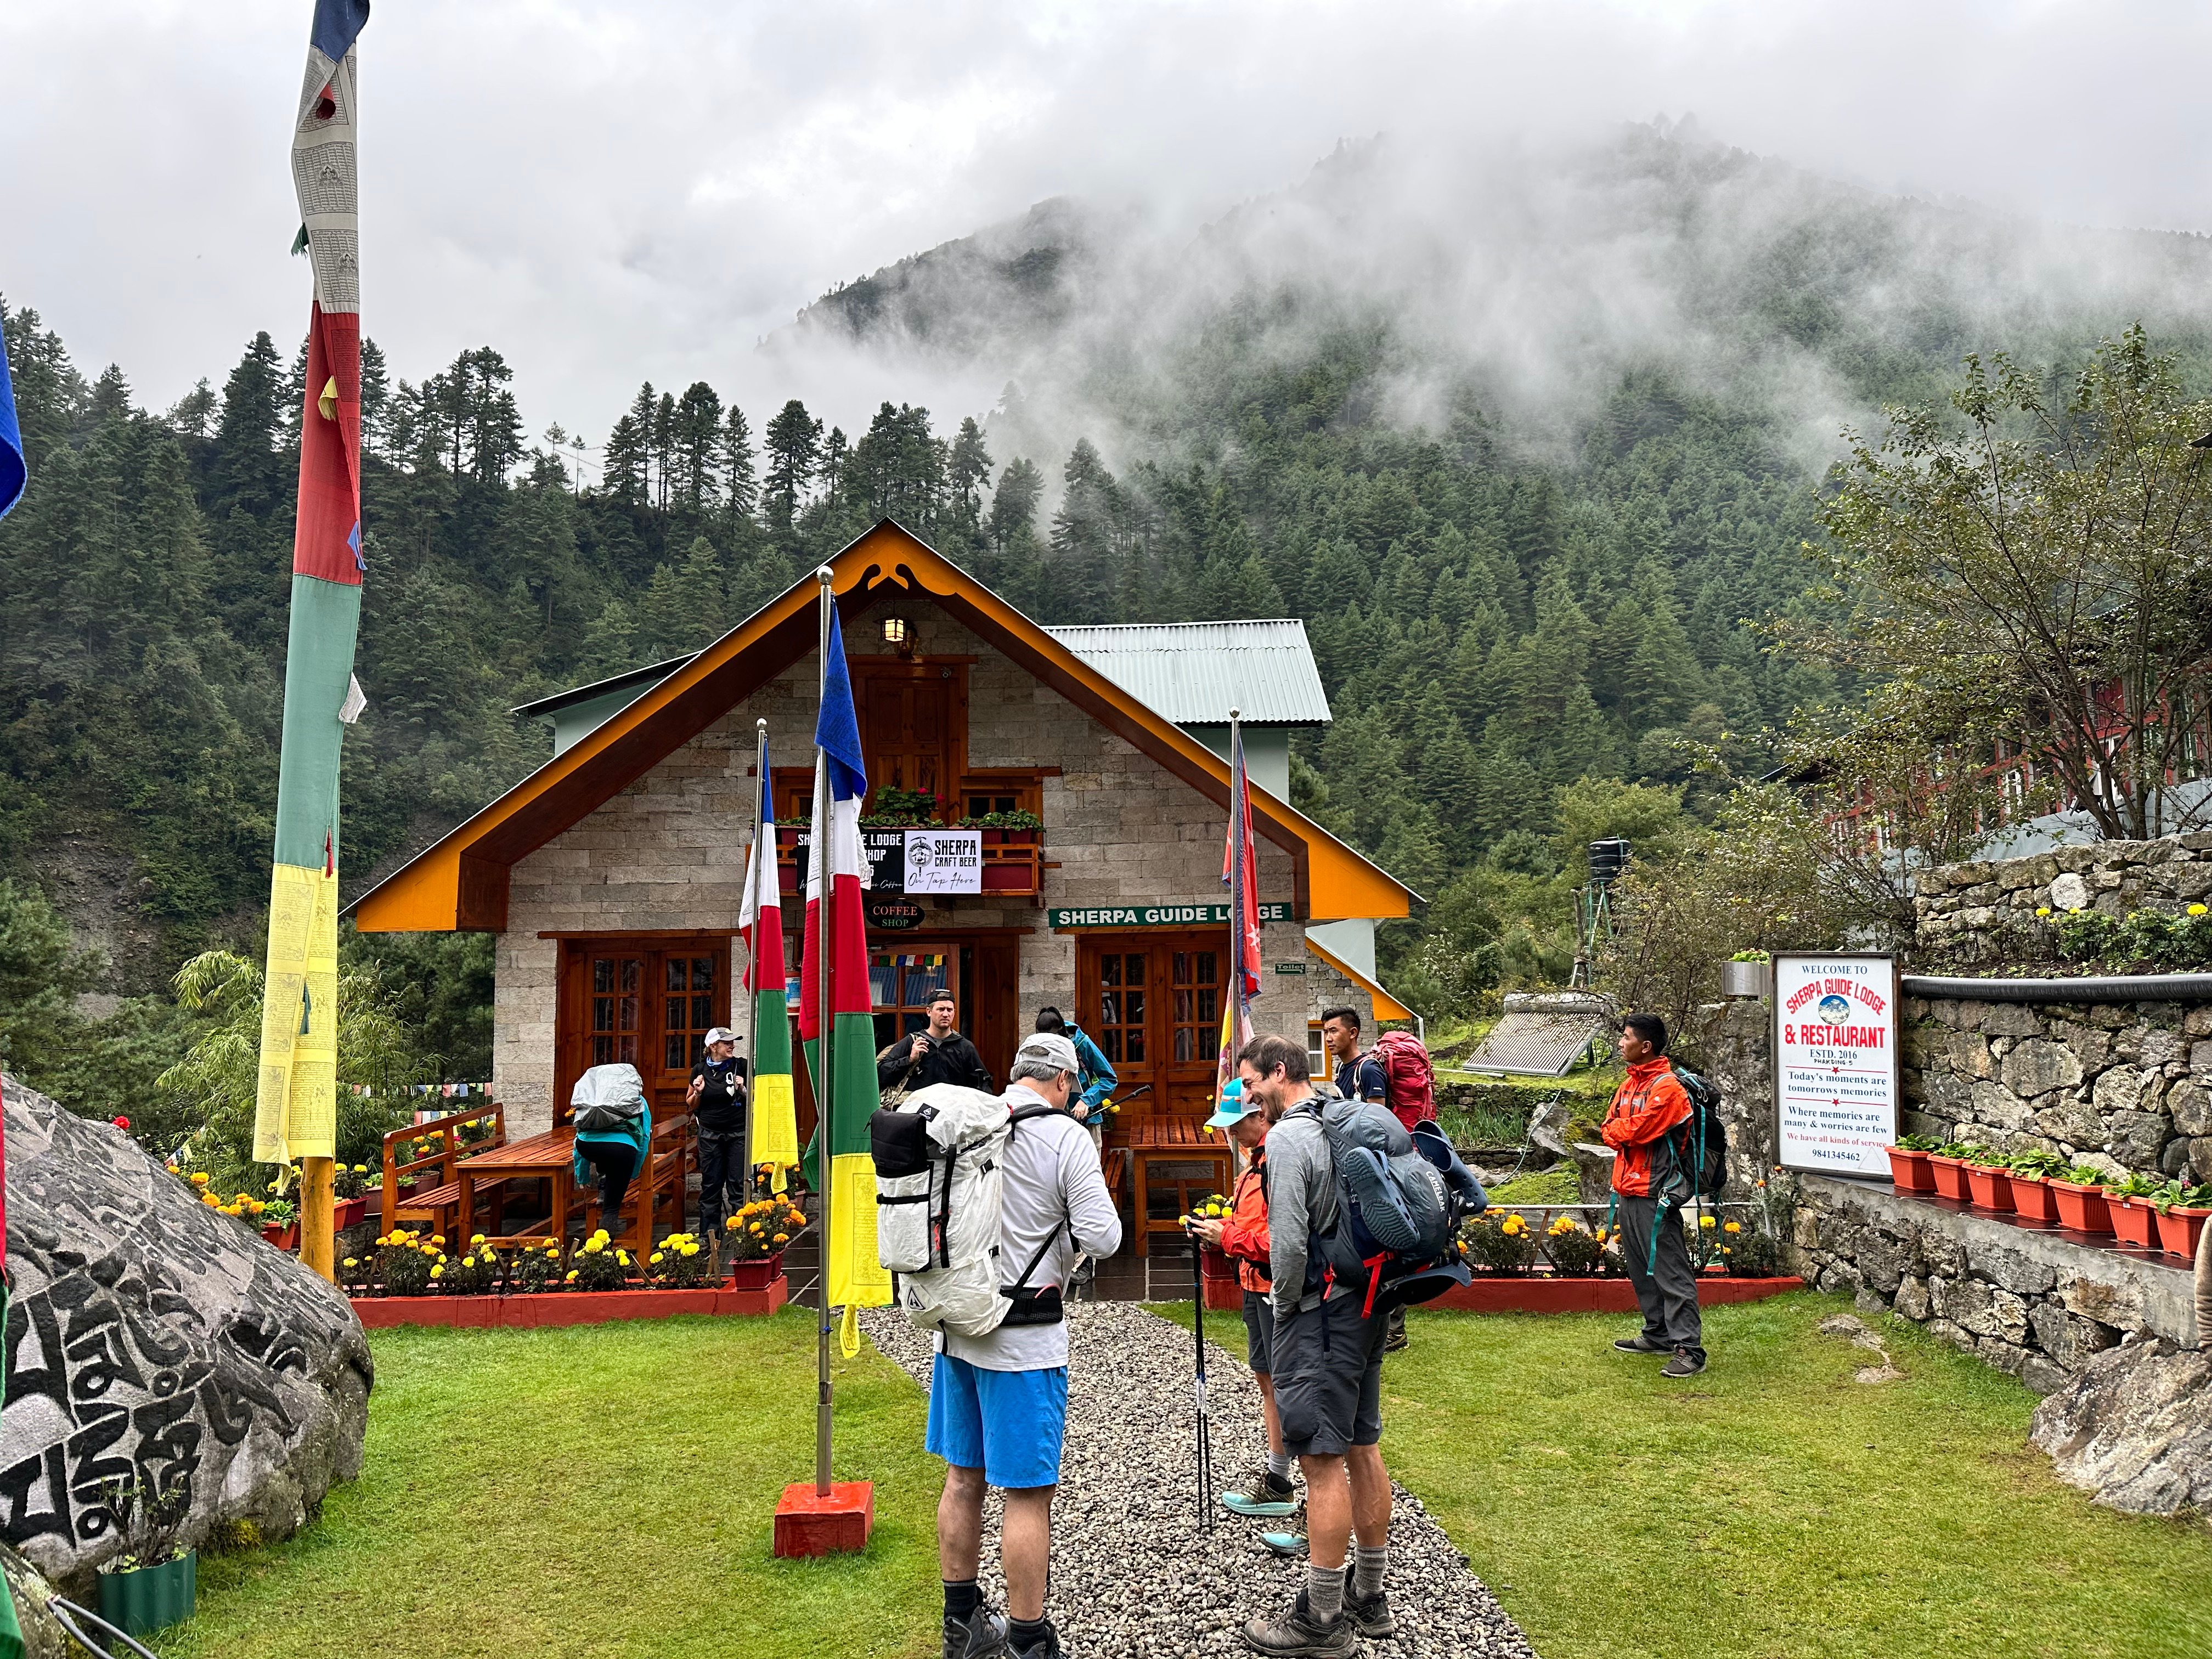 A view of Sherpa Guide Lodge in Phakding, surrounded by lush green trees and vegetation. Several trekkers are seen getting ready for their hike, with backpacks and trekking poles in hand. 